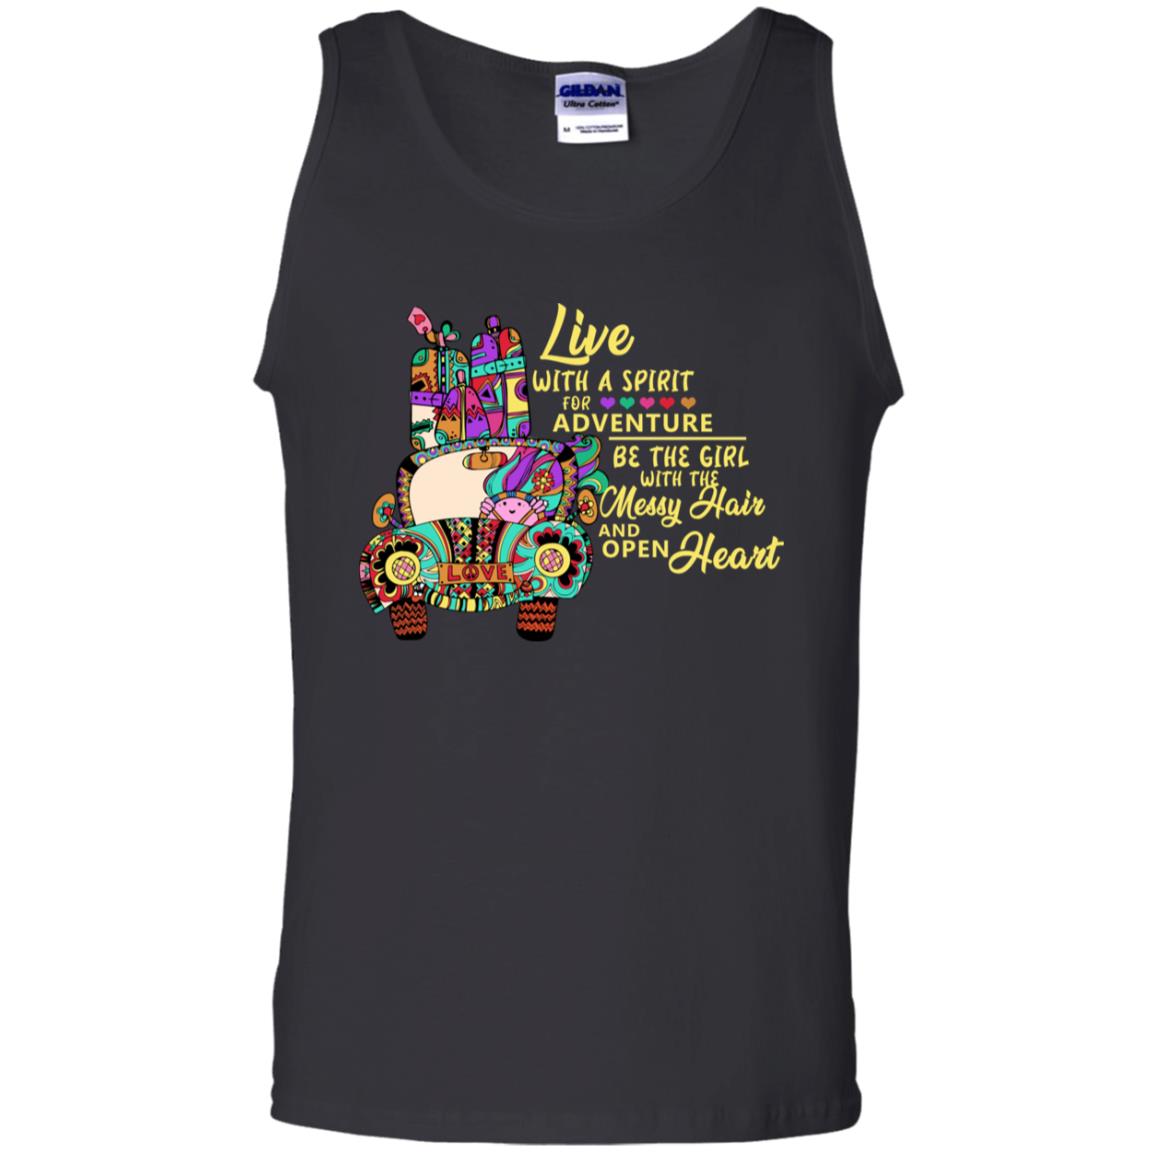 Live With A Spirit For Adventure Be The Girl With The Messy Hair And Open Heart ShirtG220 Gildan 100% Cotton Tank Top